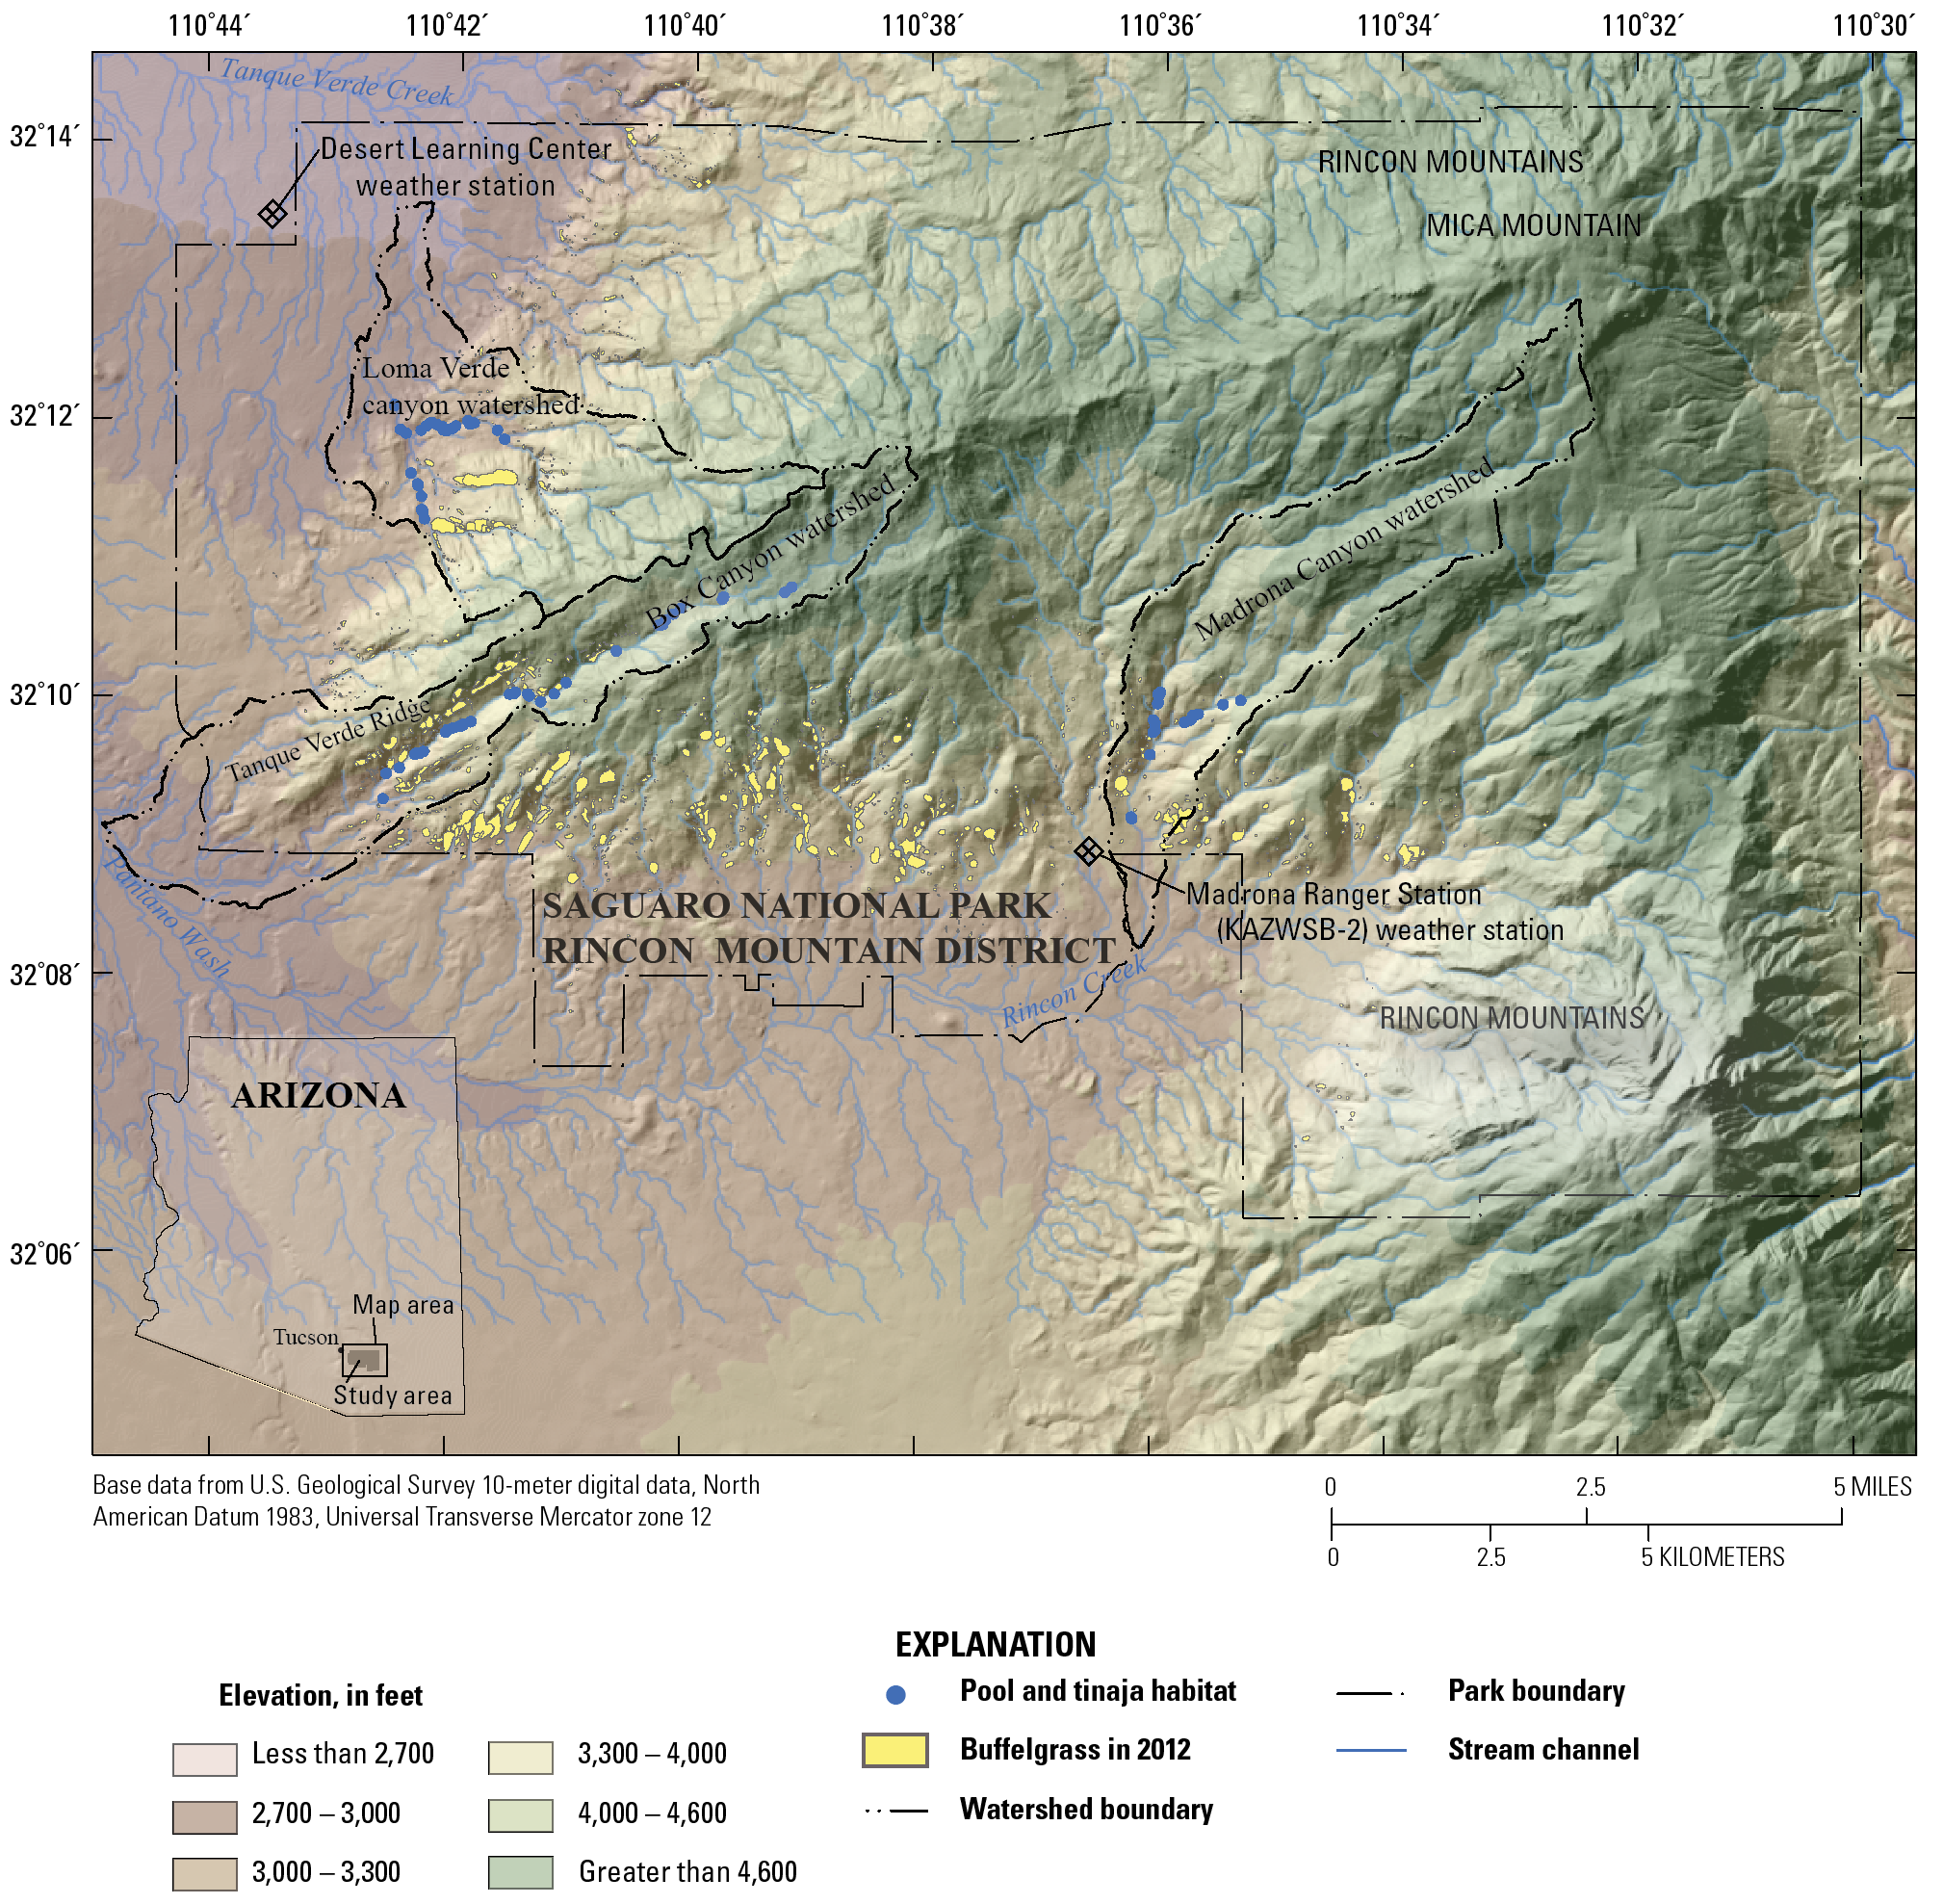 Map of Saguaro National Park-Rincon Mountain District with symbols for elevation,
                        watershed boundaries, and pool and tinaja habitat